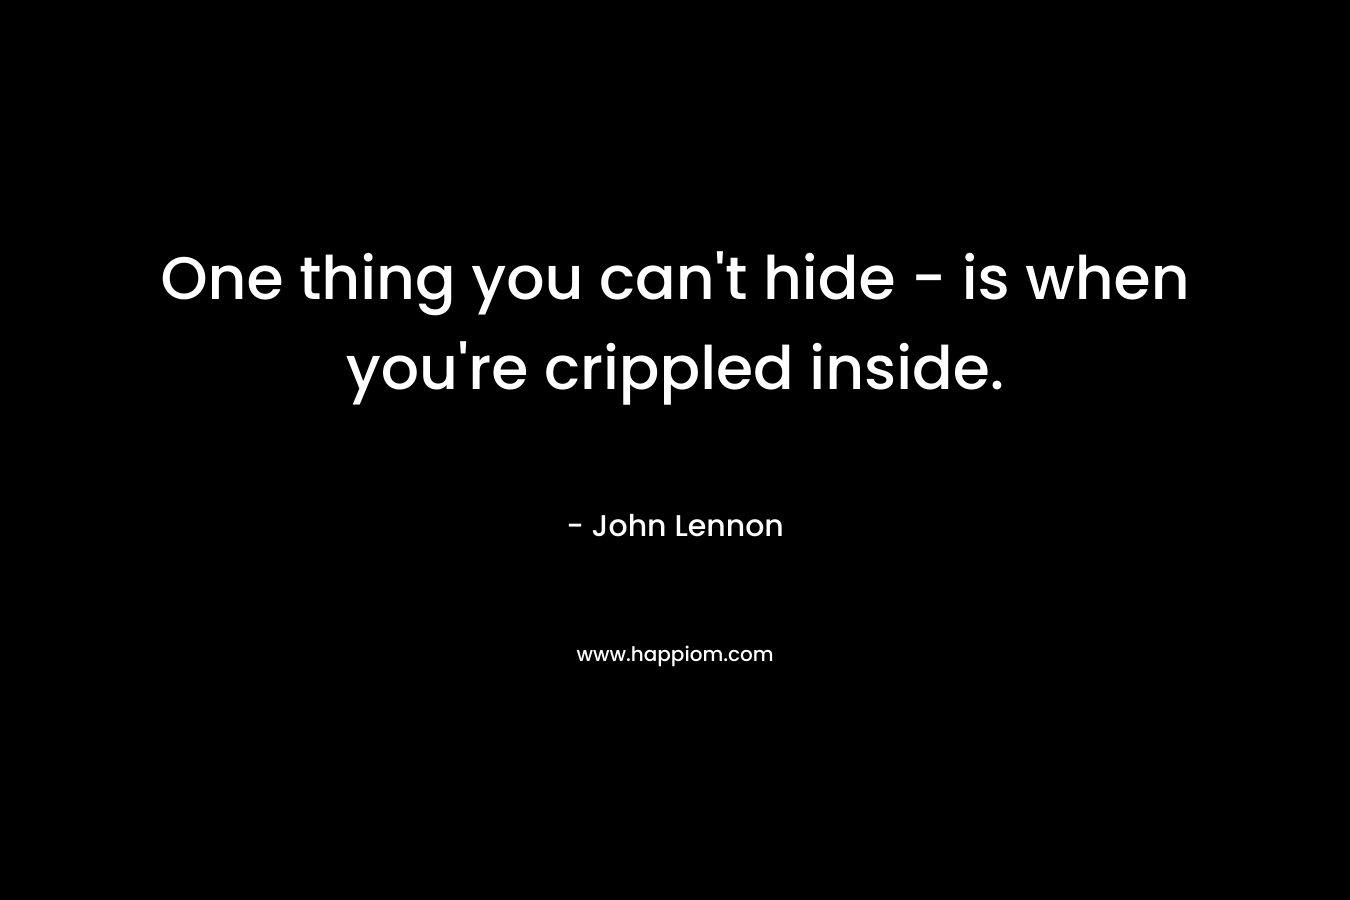 One thing you can't hide - is when you're crippled inside.